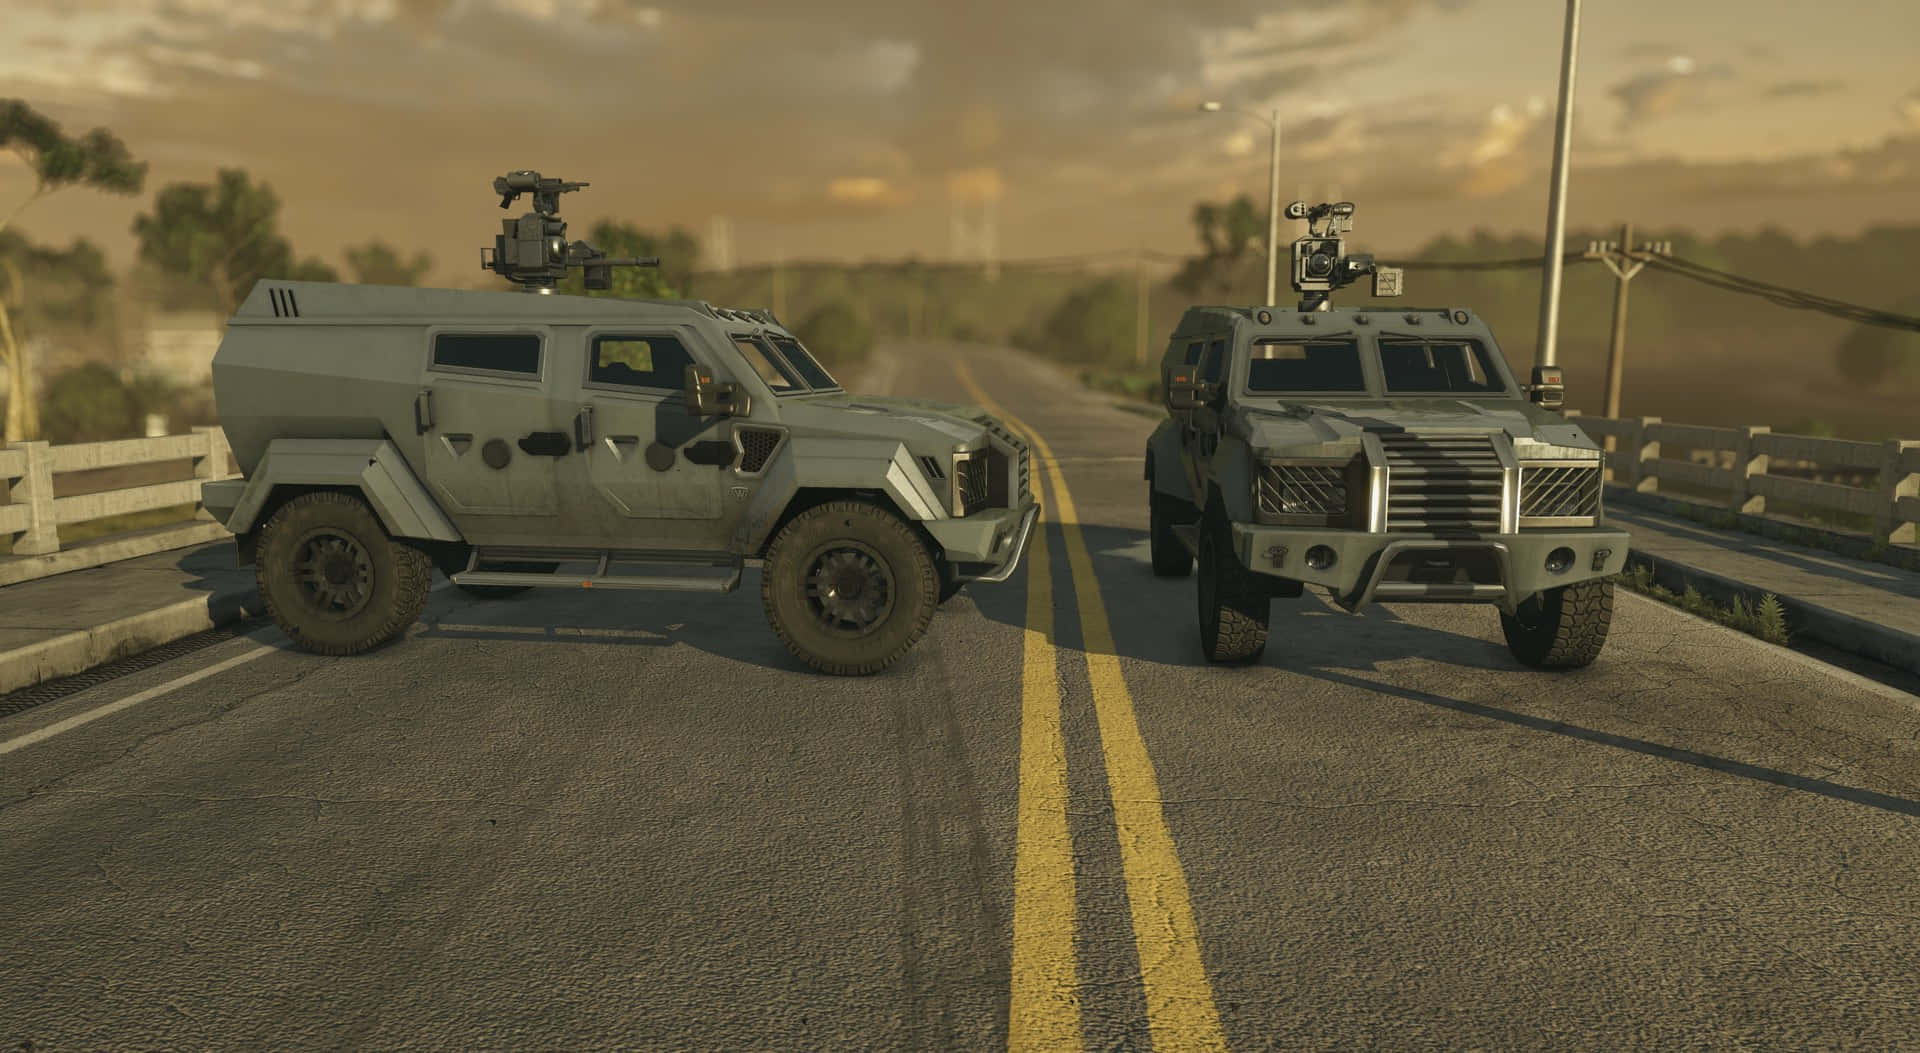 Confrontation on the Battlefield - Military Vehicles in Action Wallpaper